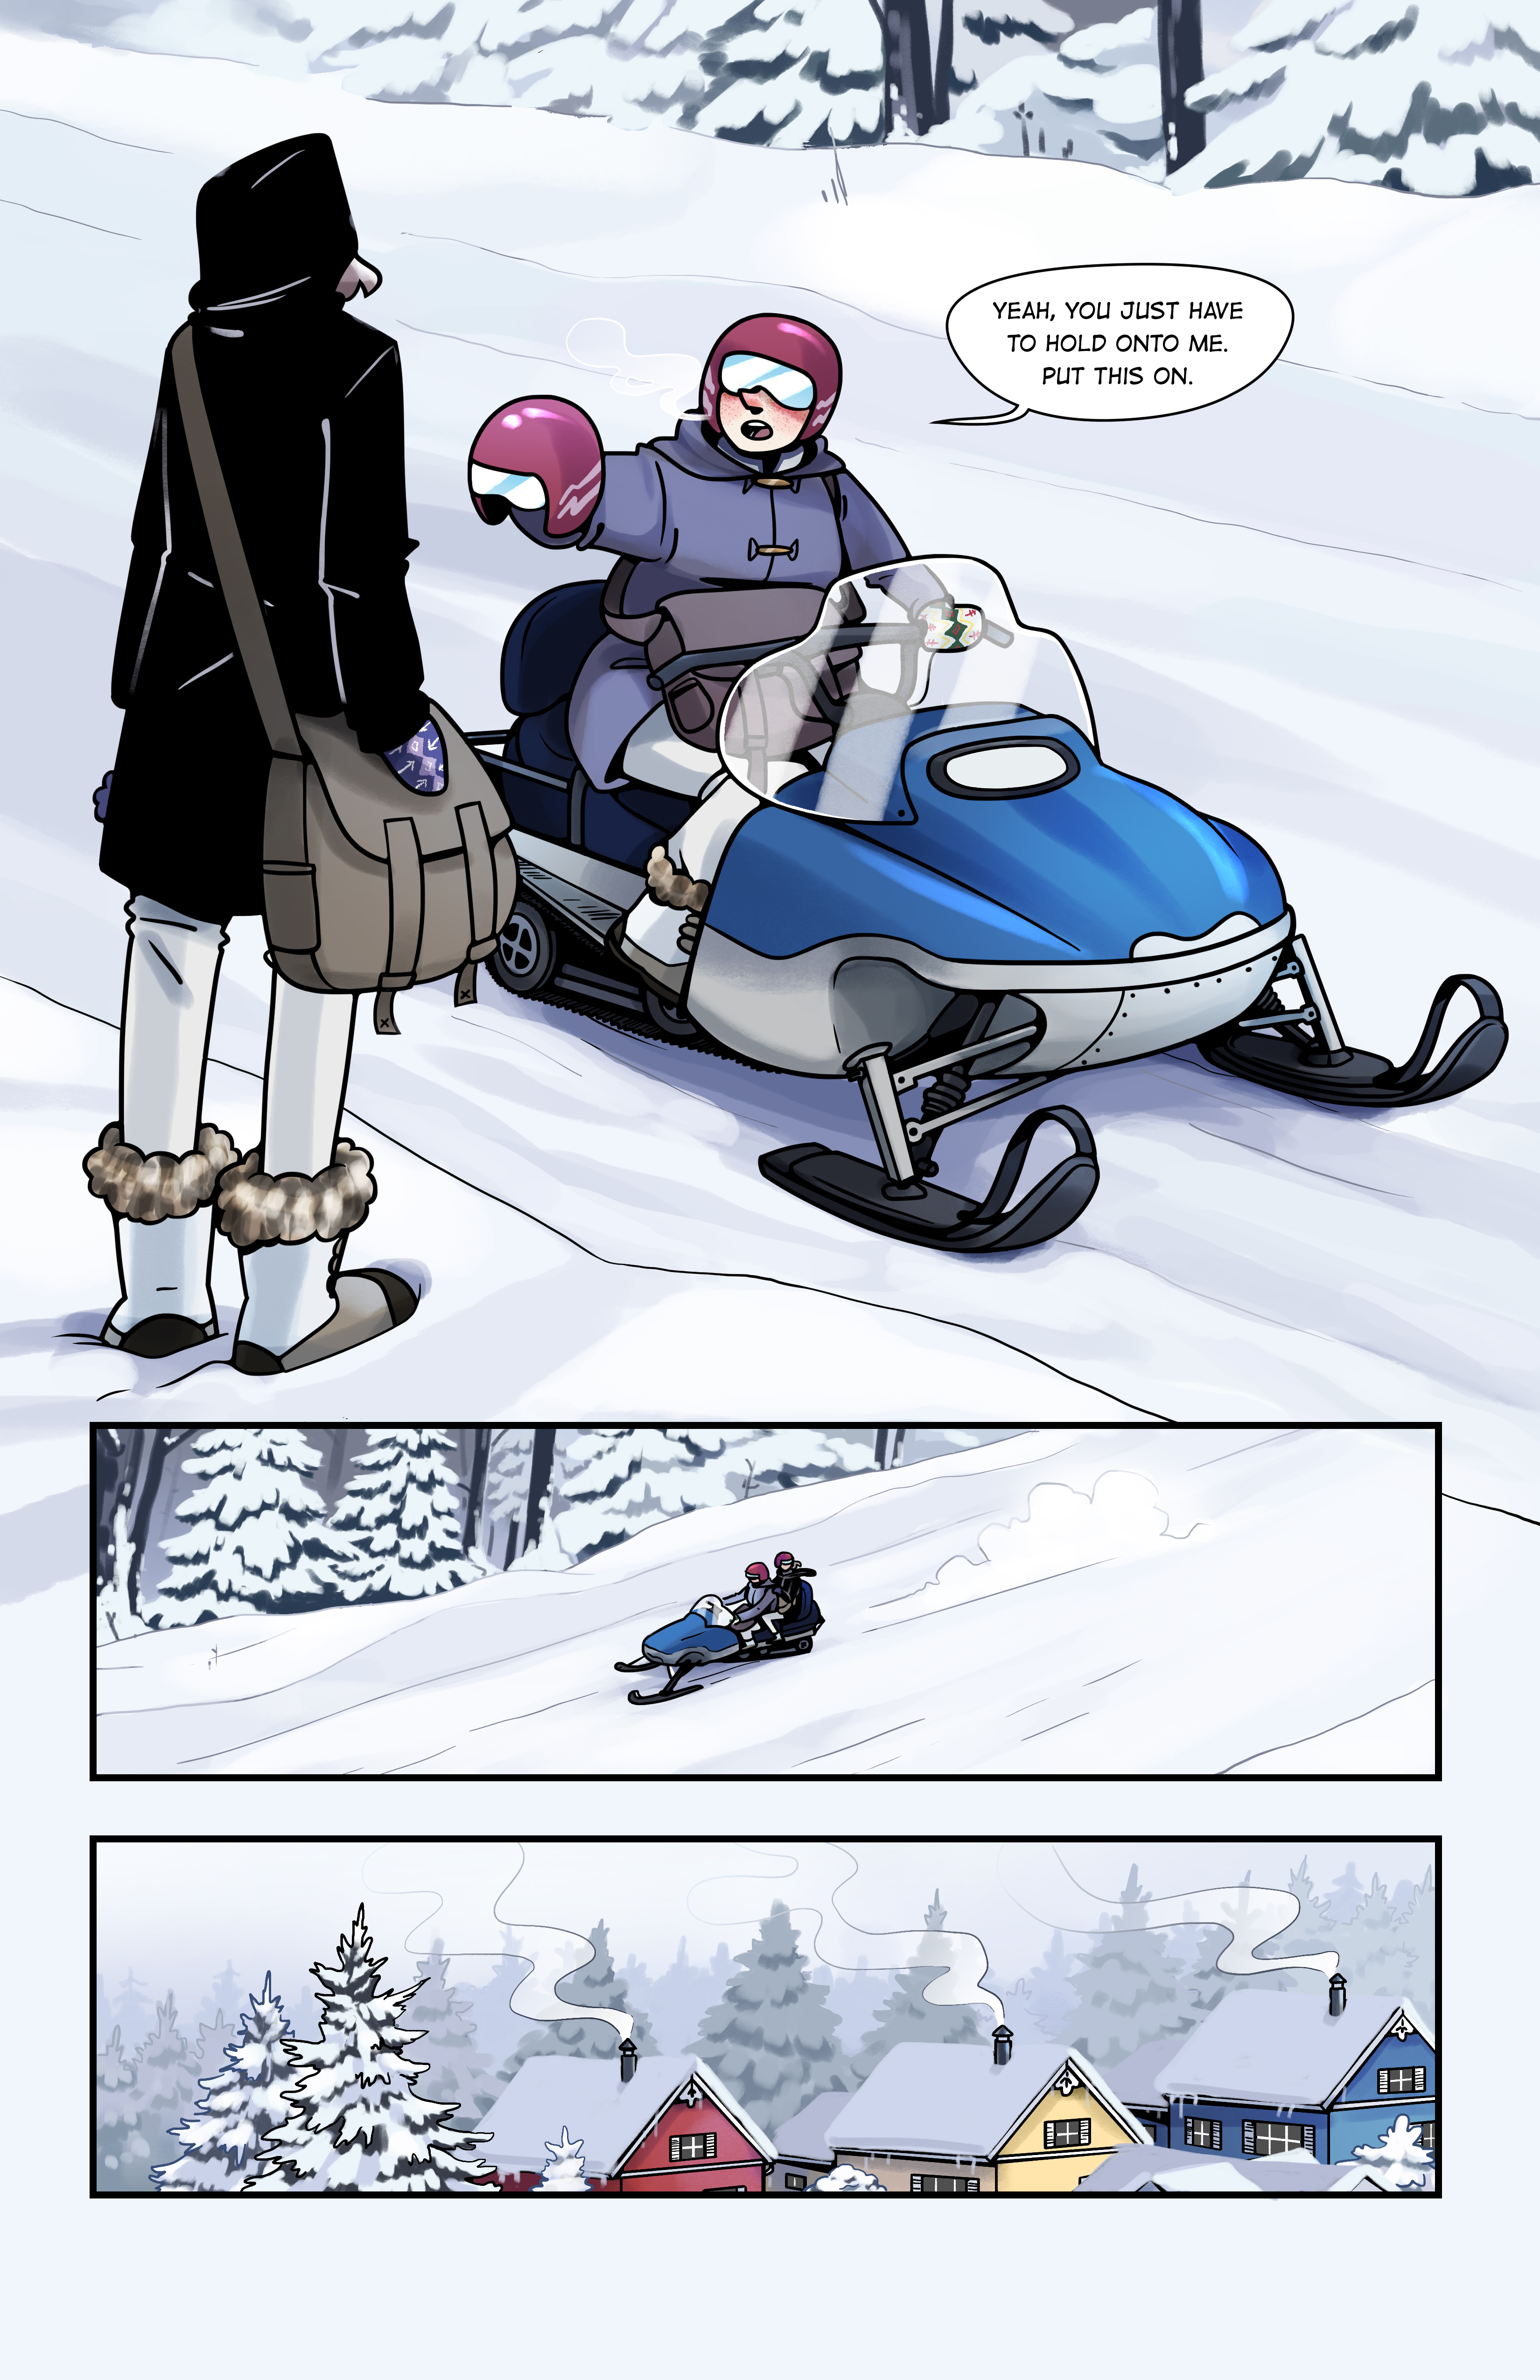 Freya and Corin board a snowmobile and ride into town.